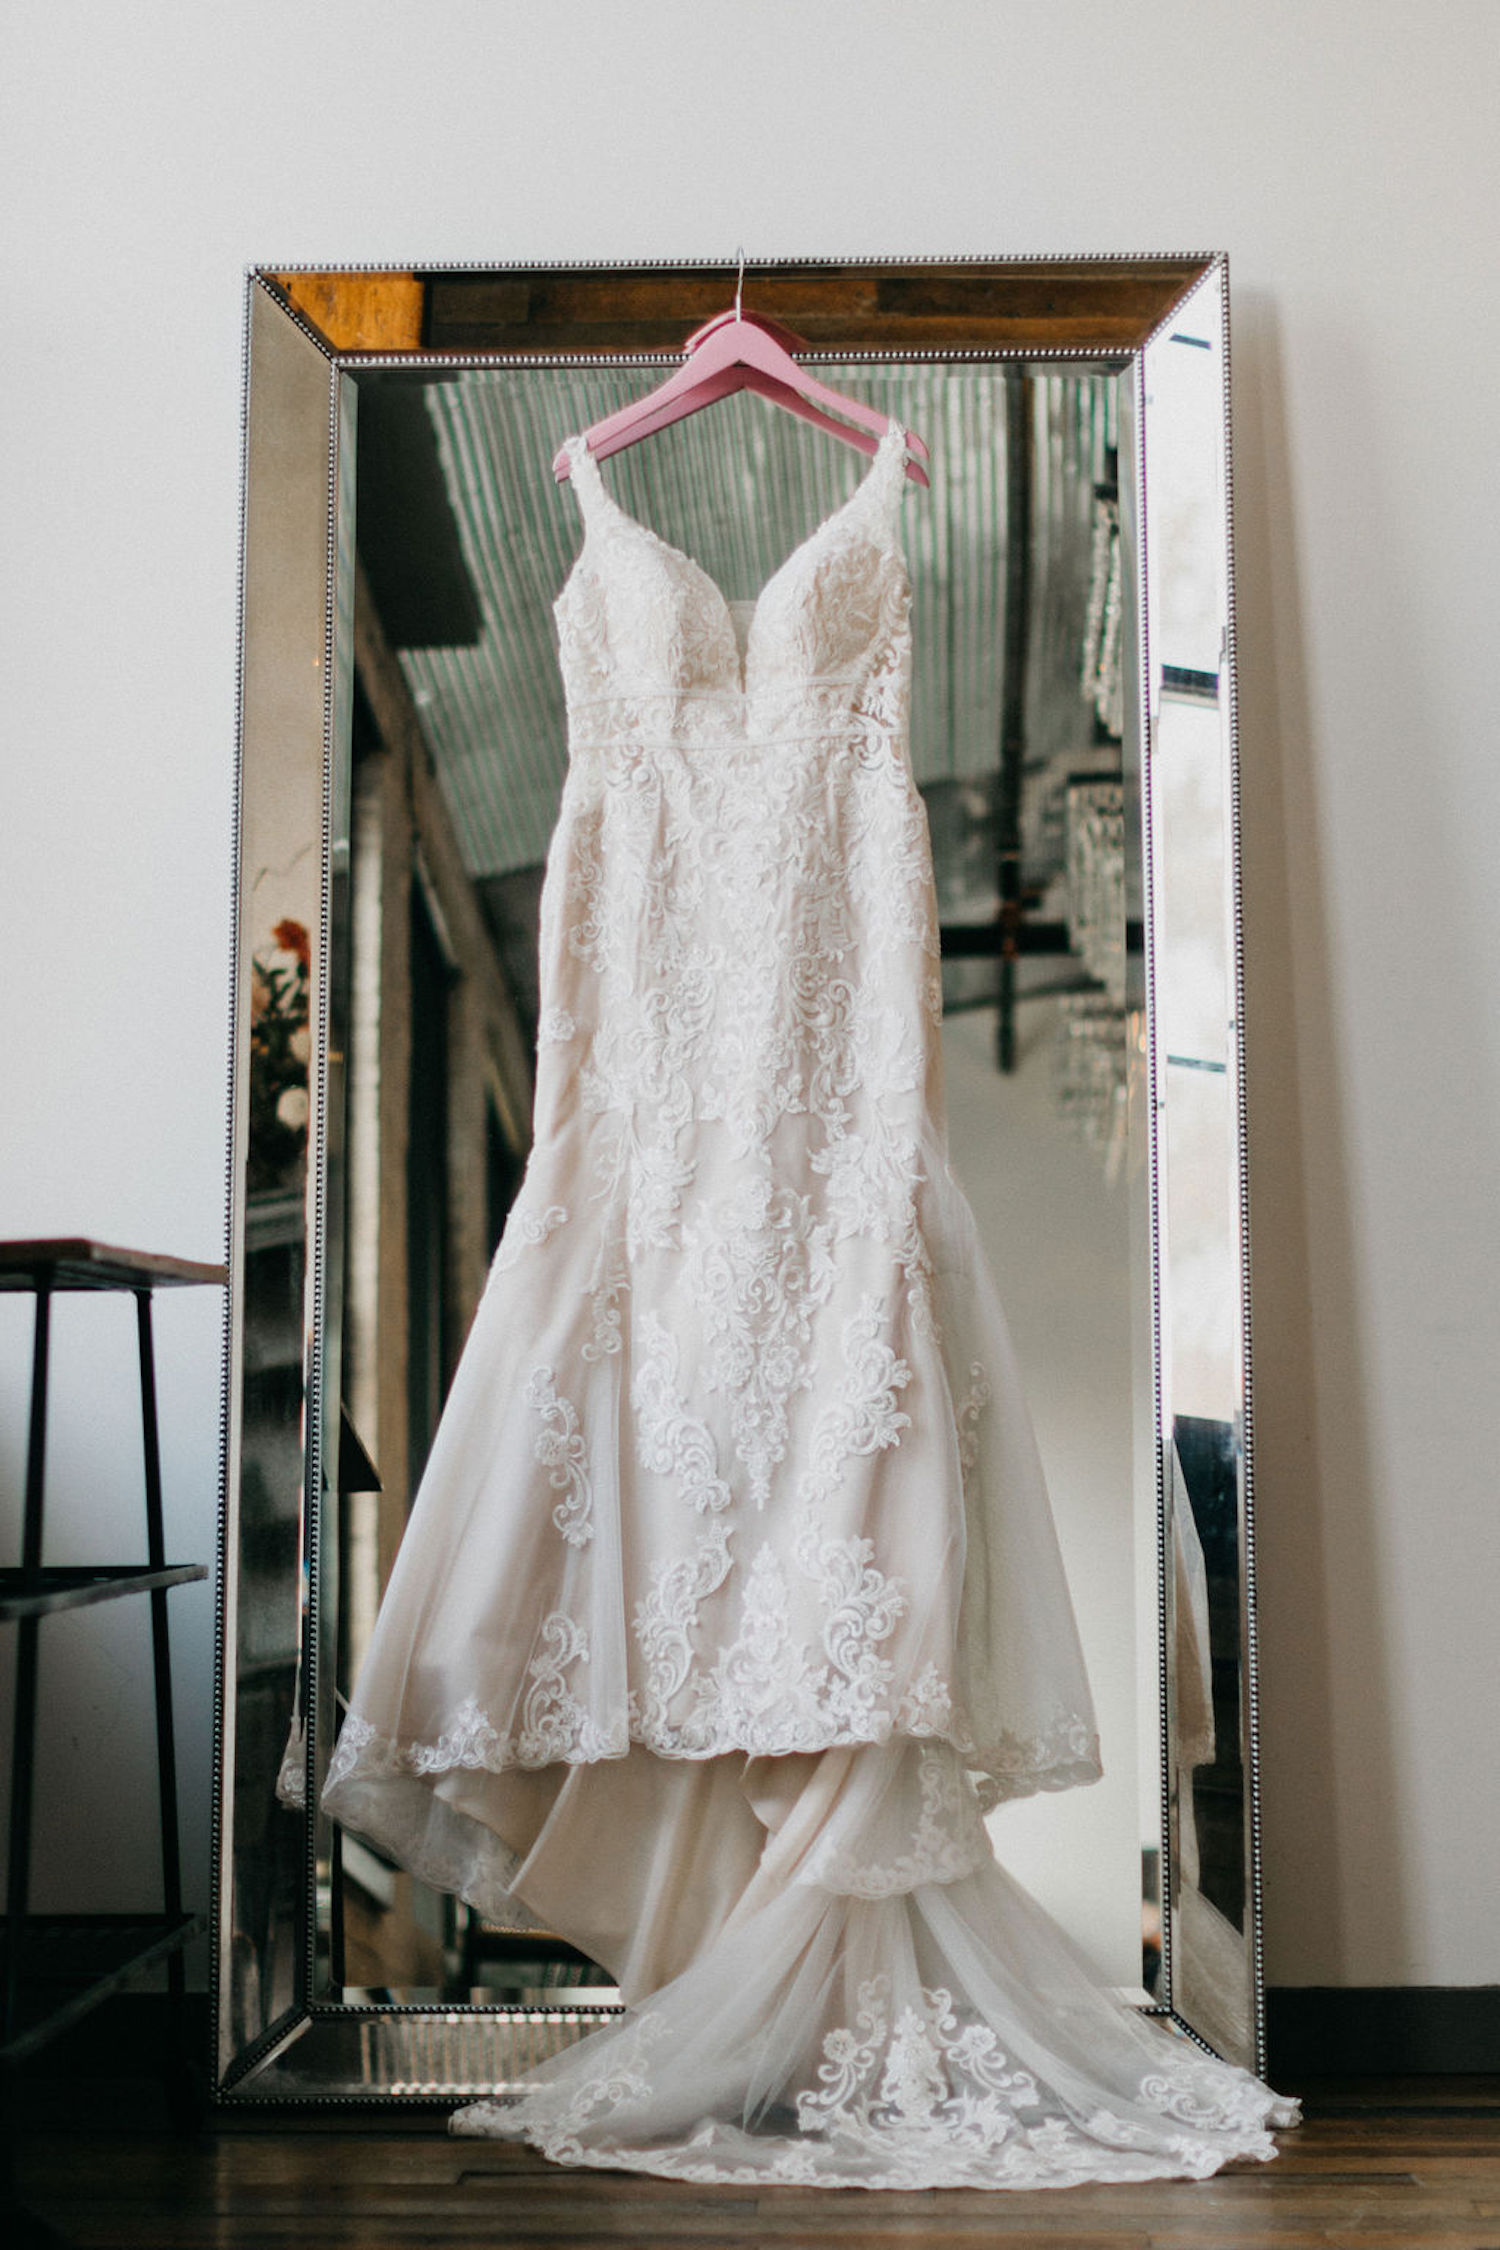 Wedding gown hanging in front of mirror